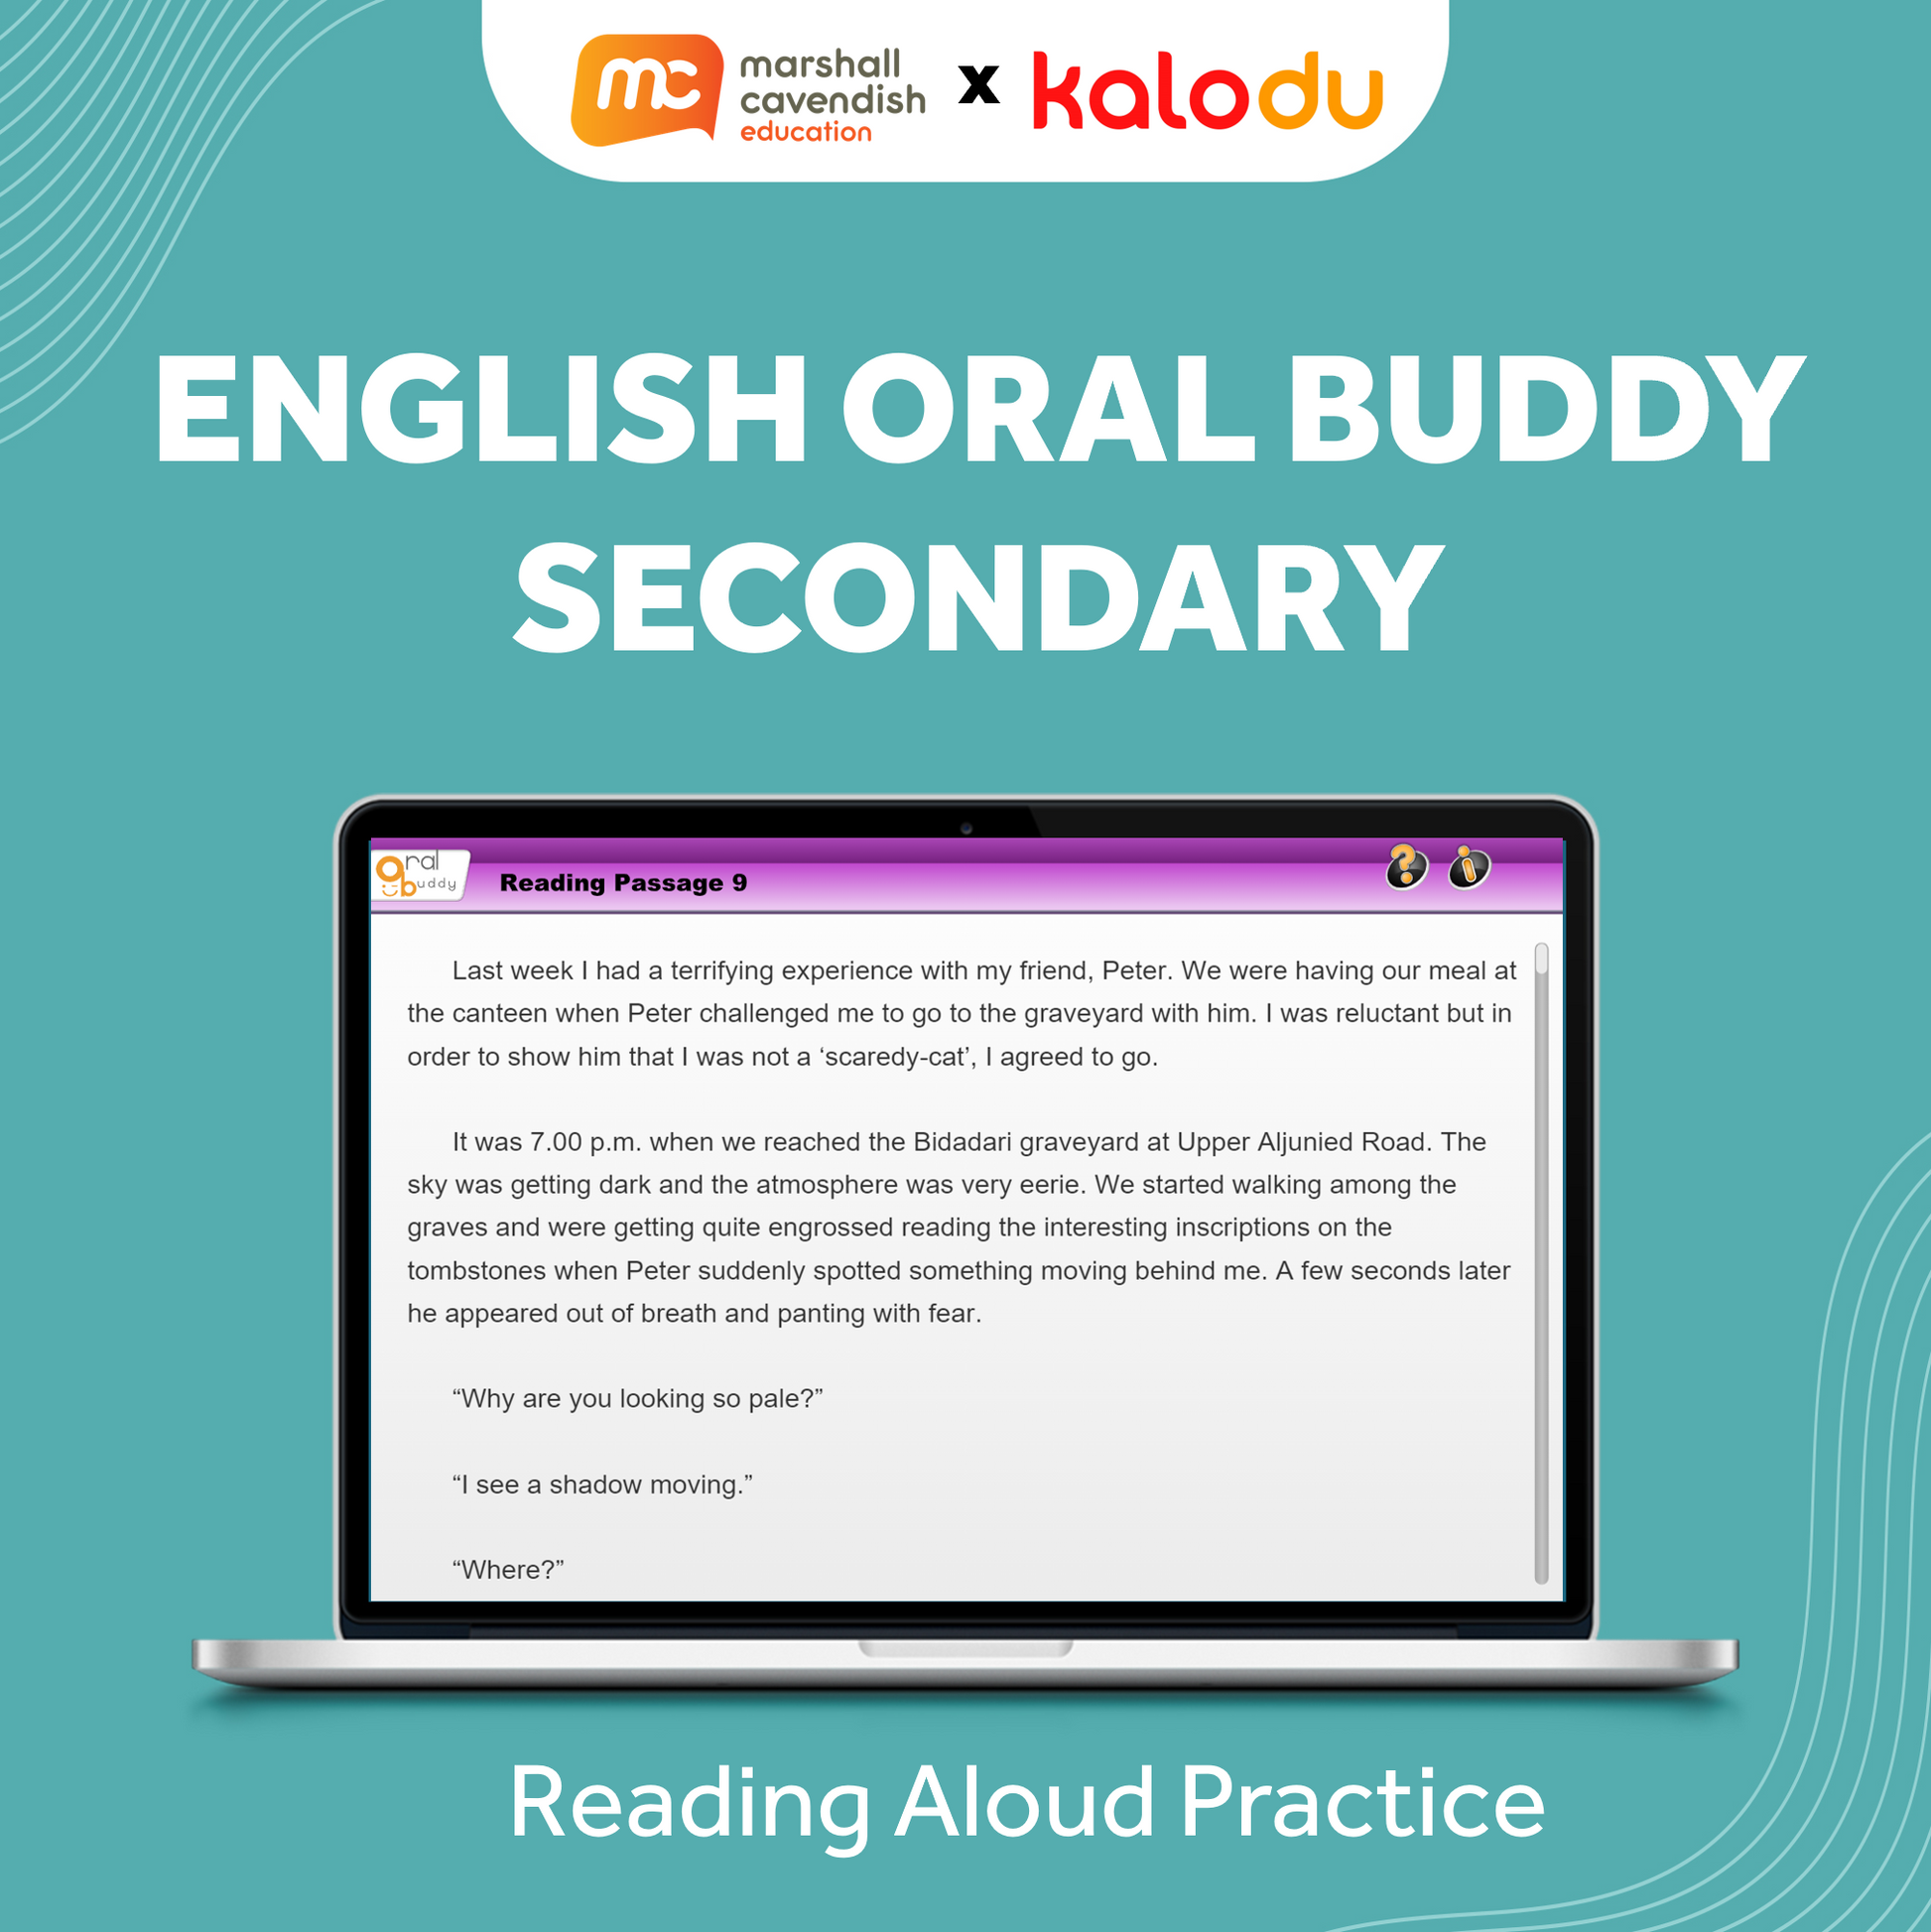 Secondary English Oral Buddy - Reading Aloud Practice